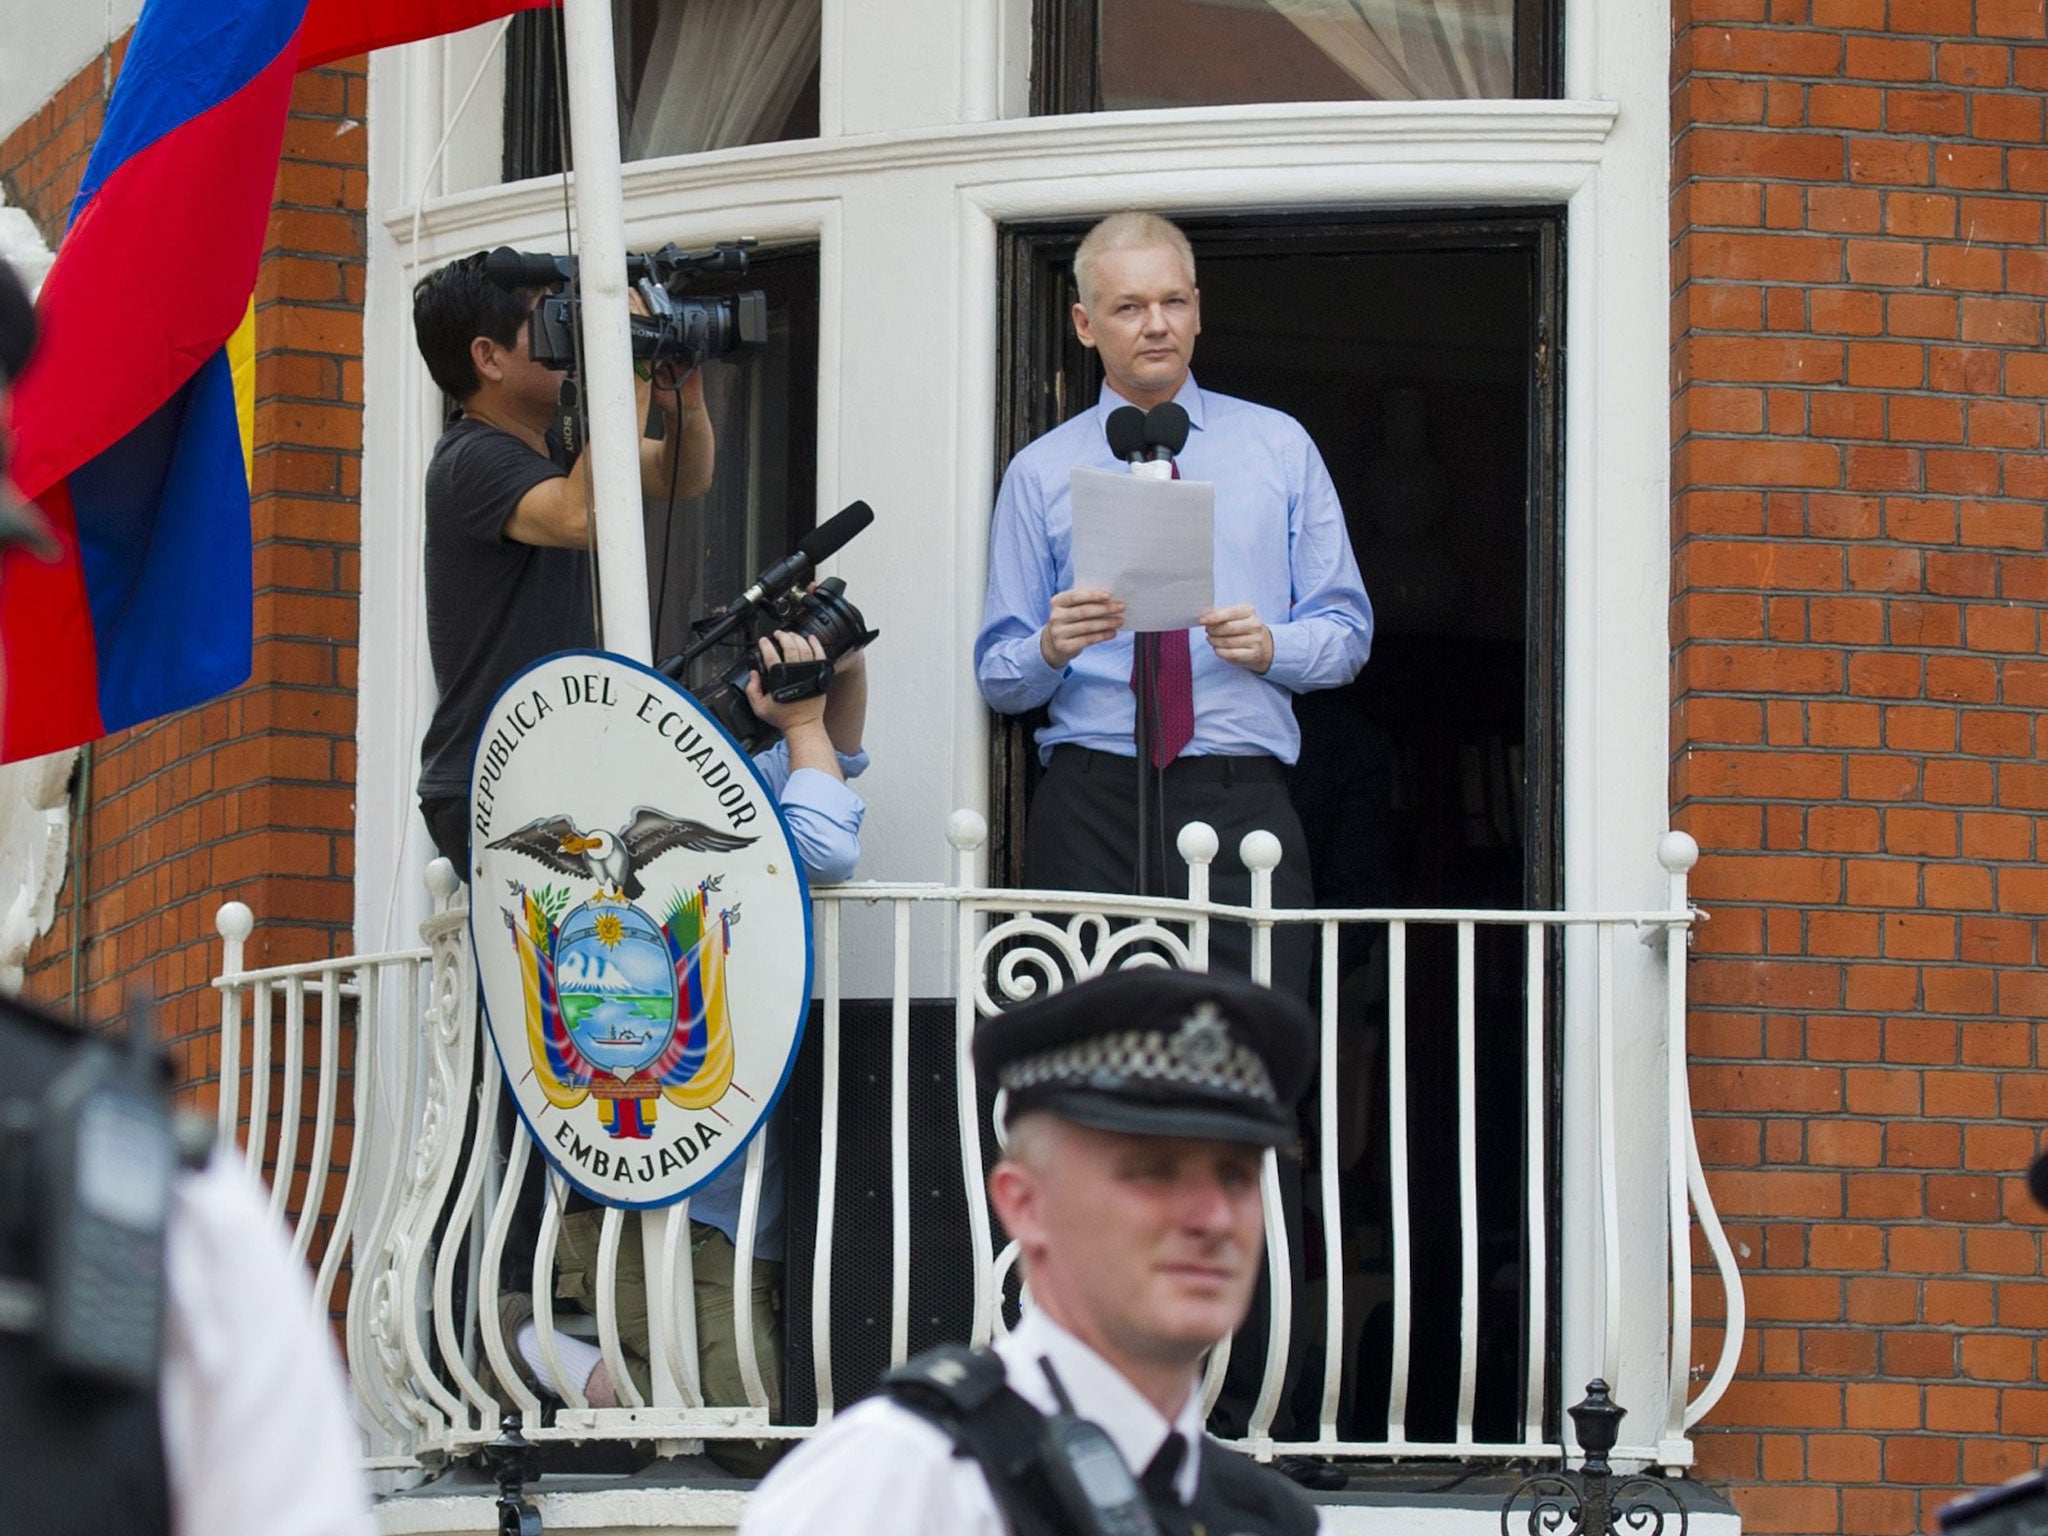 Julian Assange delivers a statement on the balcony at the Ecuador Embassy on 19 August 2012